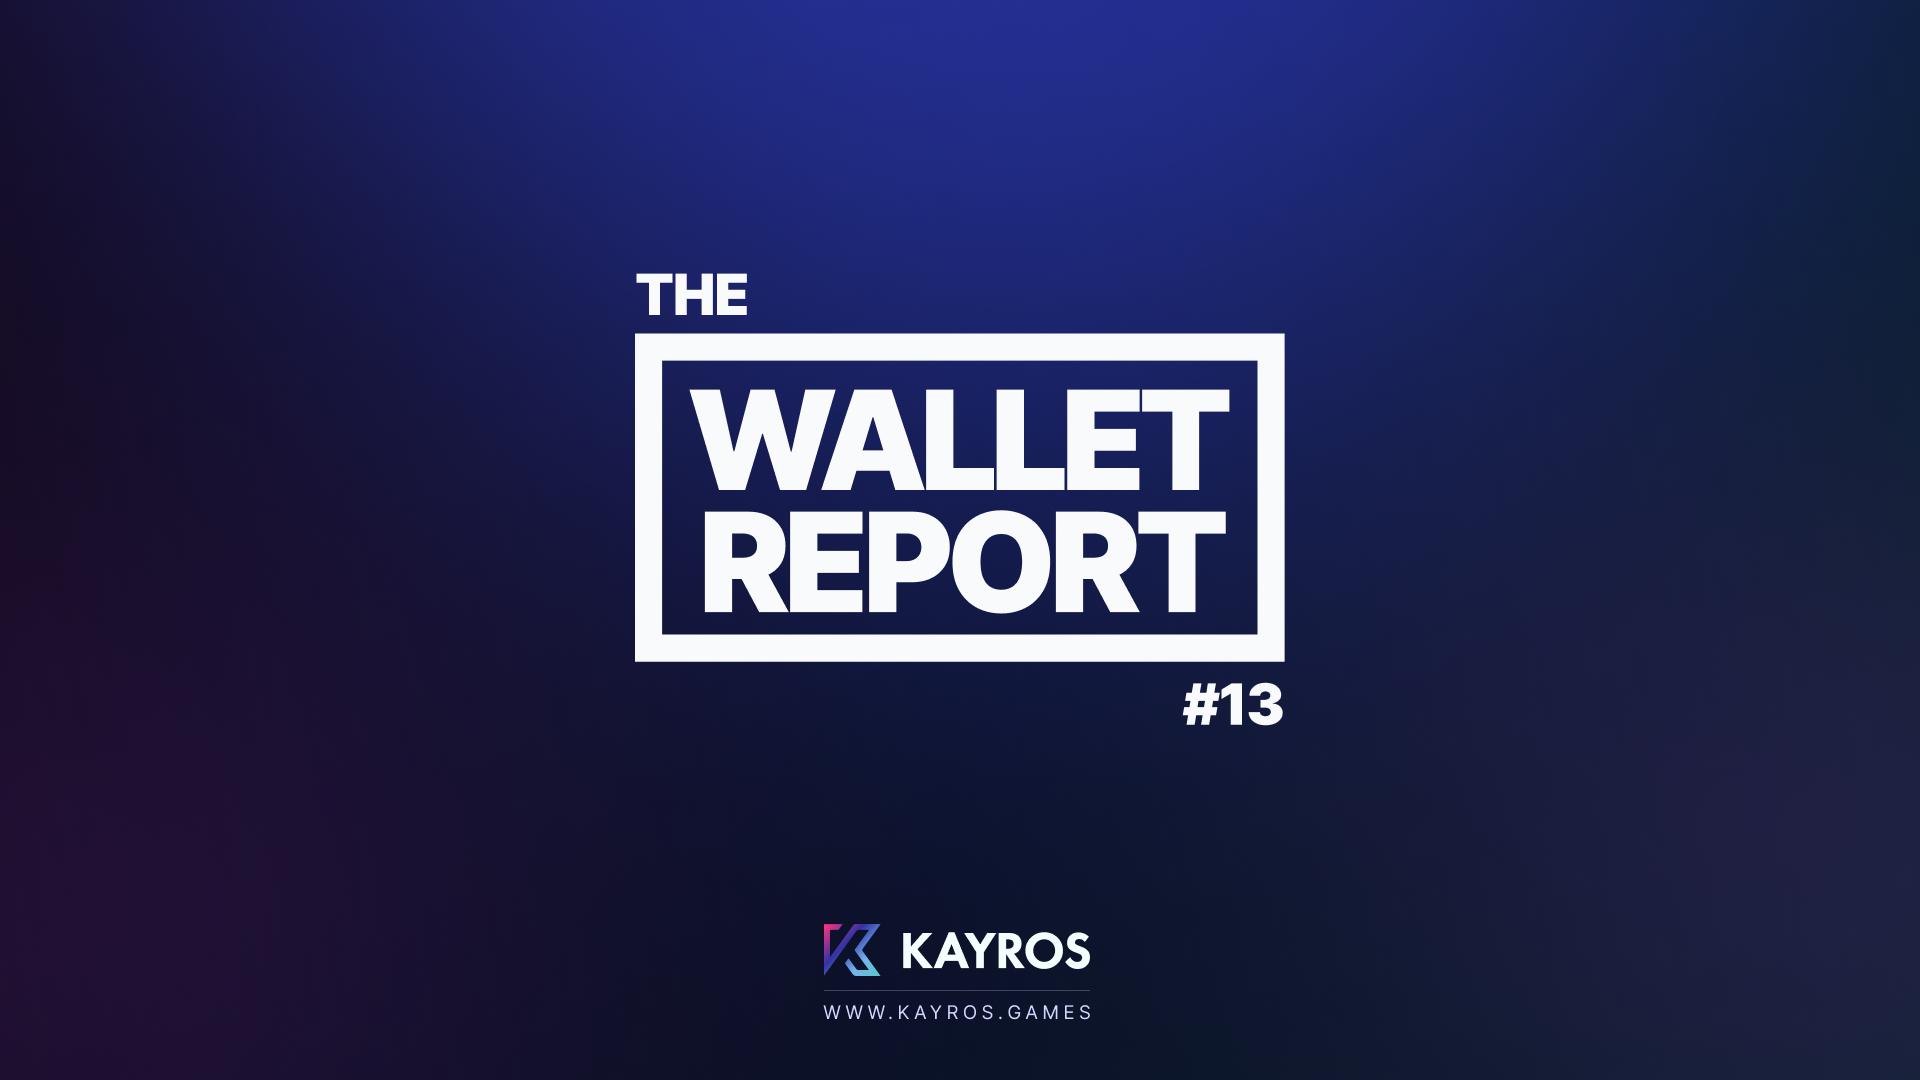 The Wallet Report #13